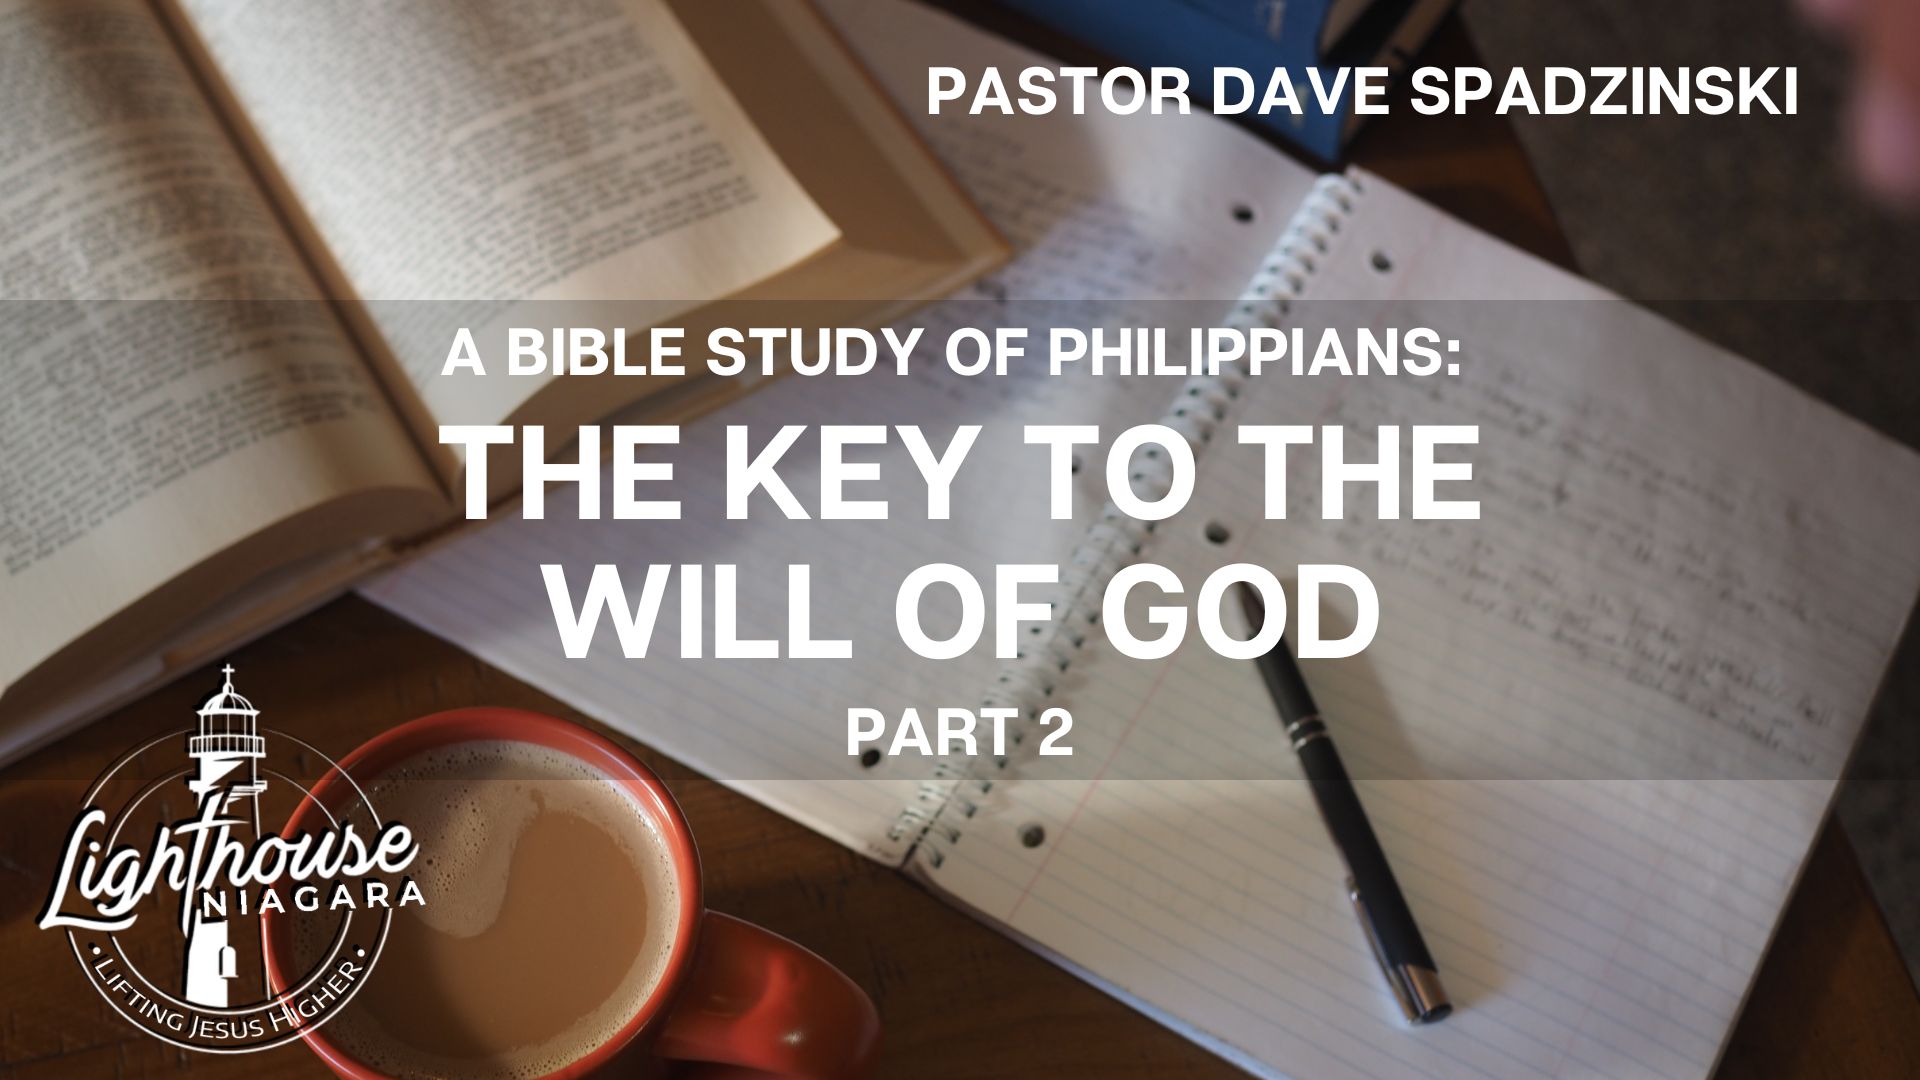 A Bible Study Of Philippians: The Key To The Will Of God - Pastor Dave Spadzinski